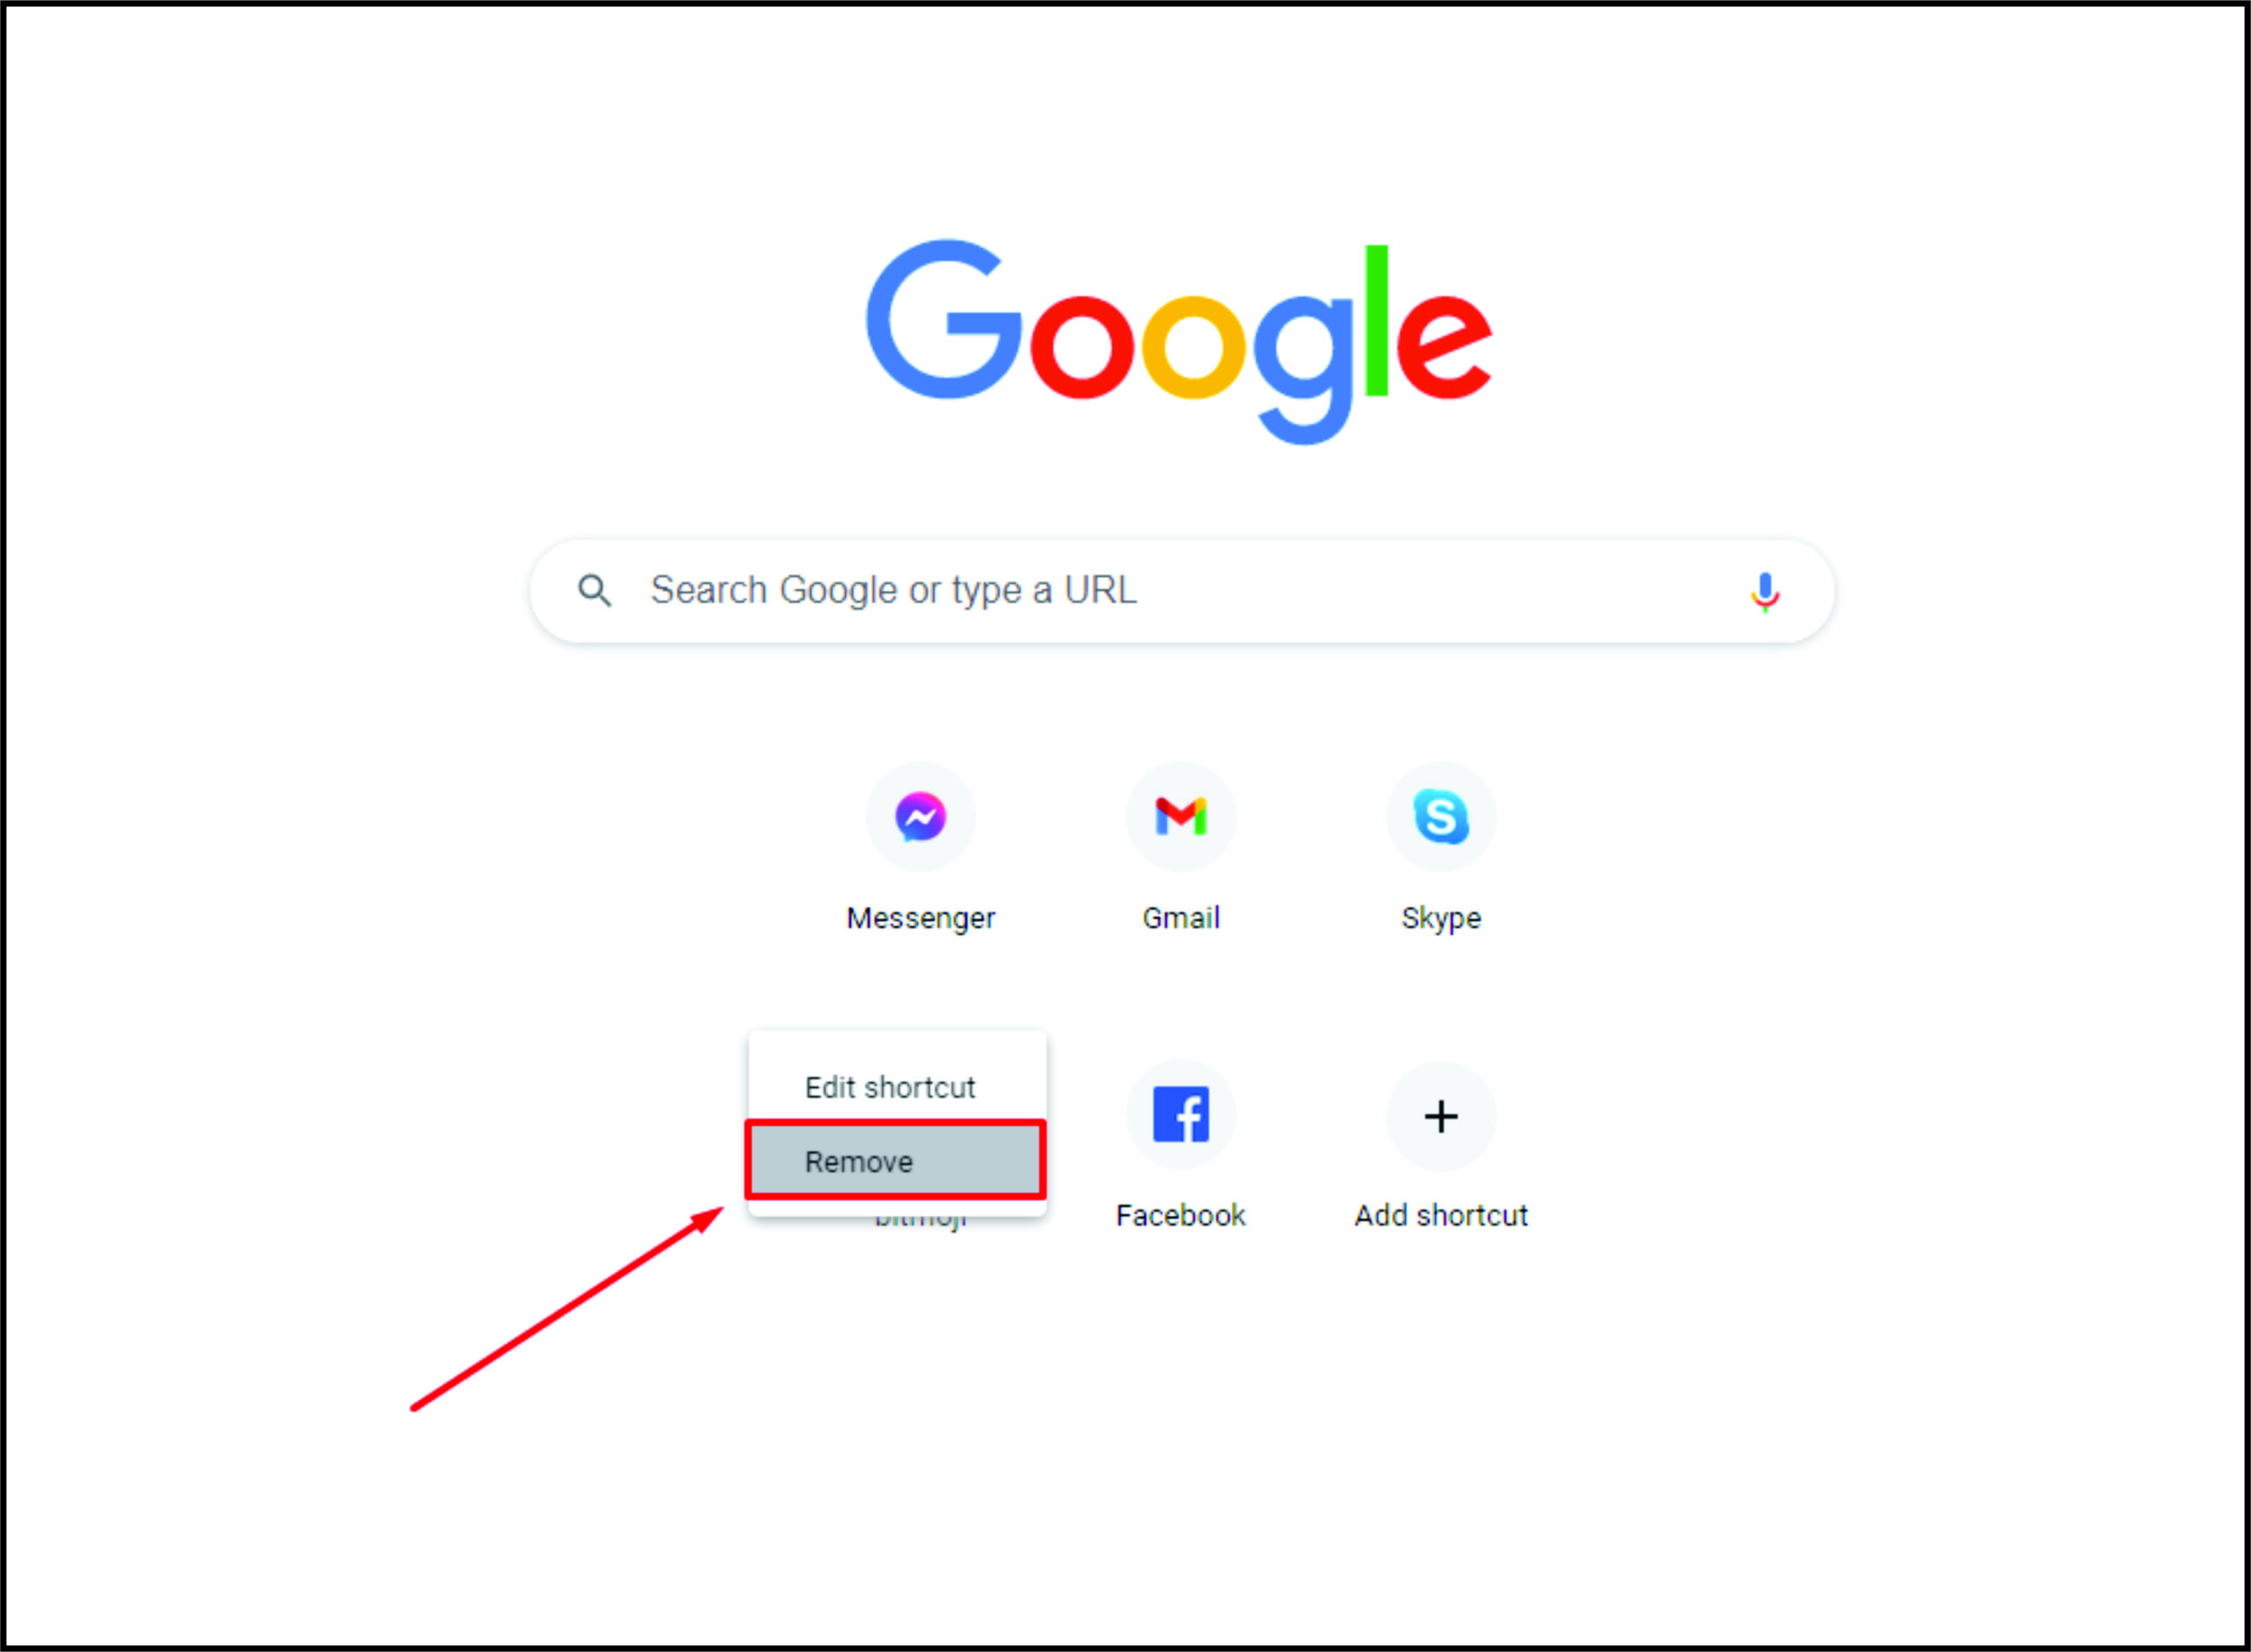 Disable all extensions by toggling the switch to off
Restart Chrome to see if the issue is resolved